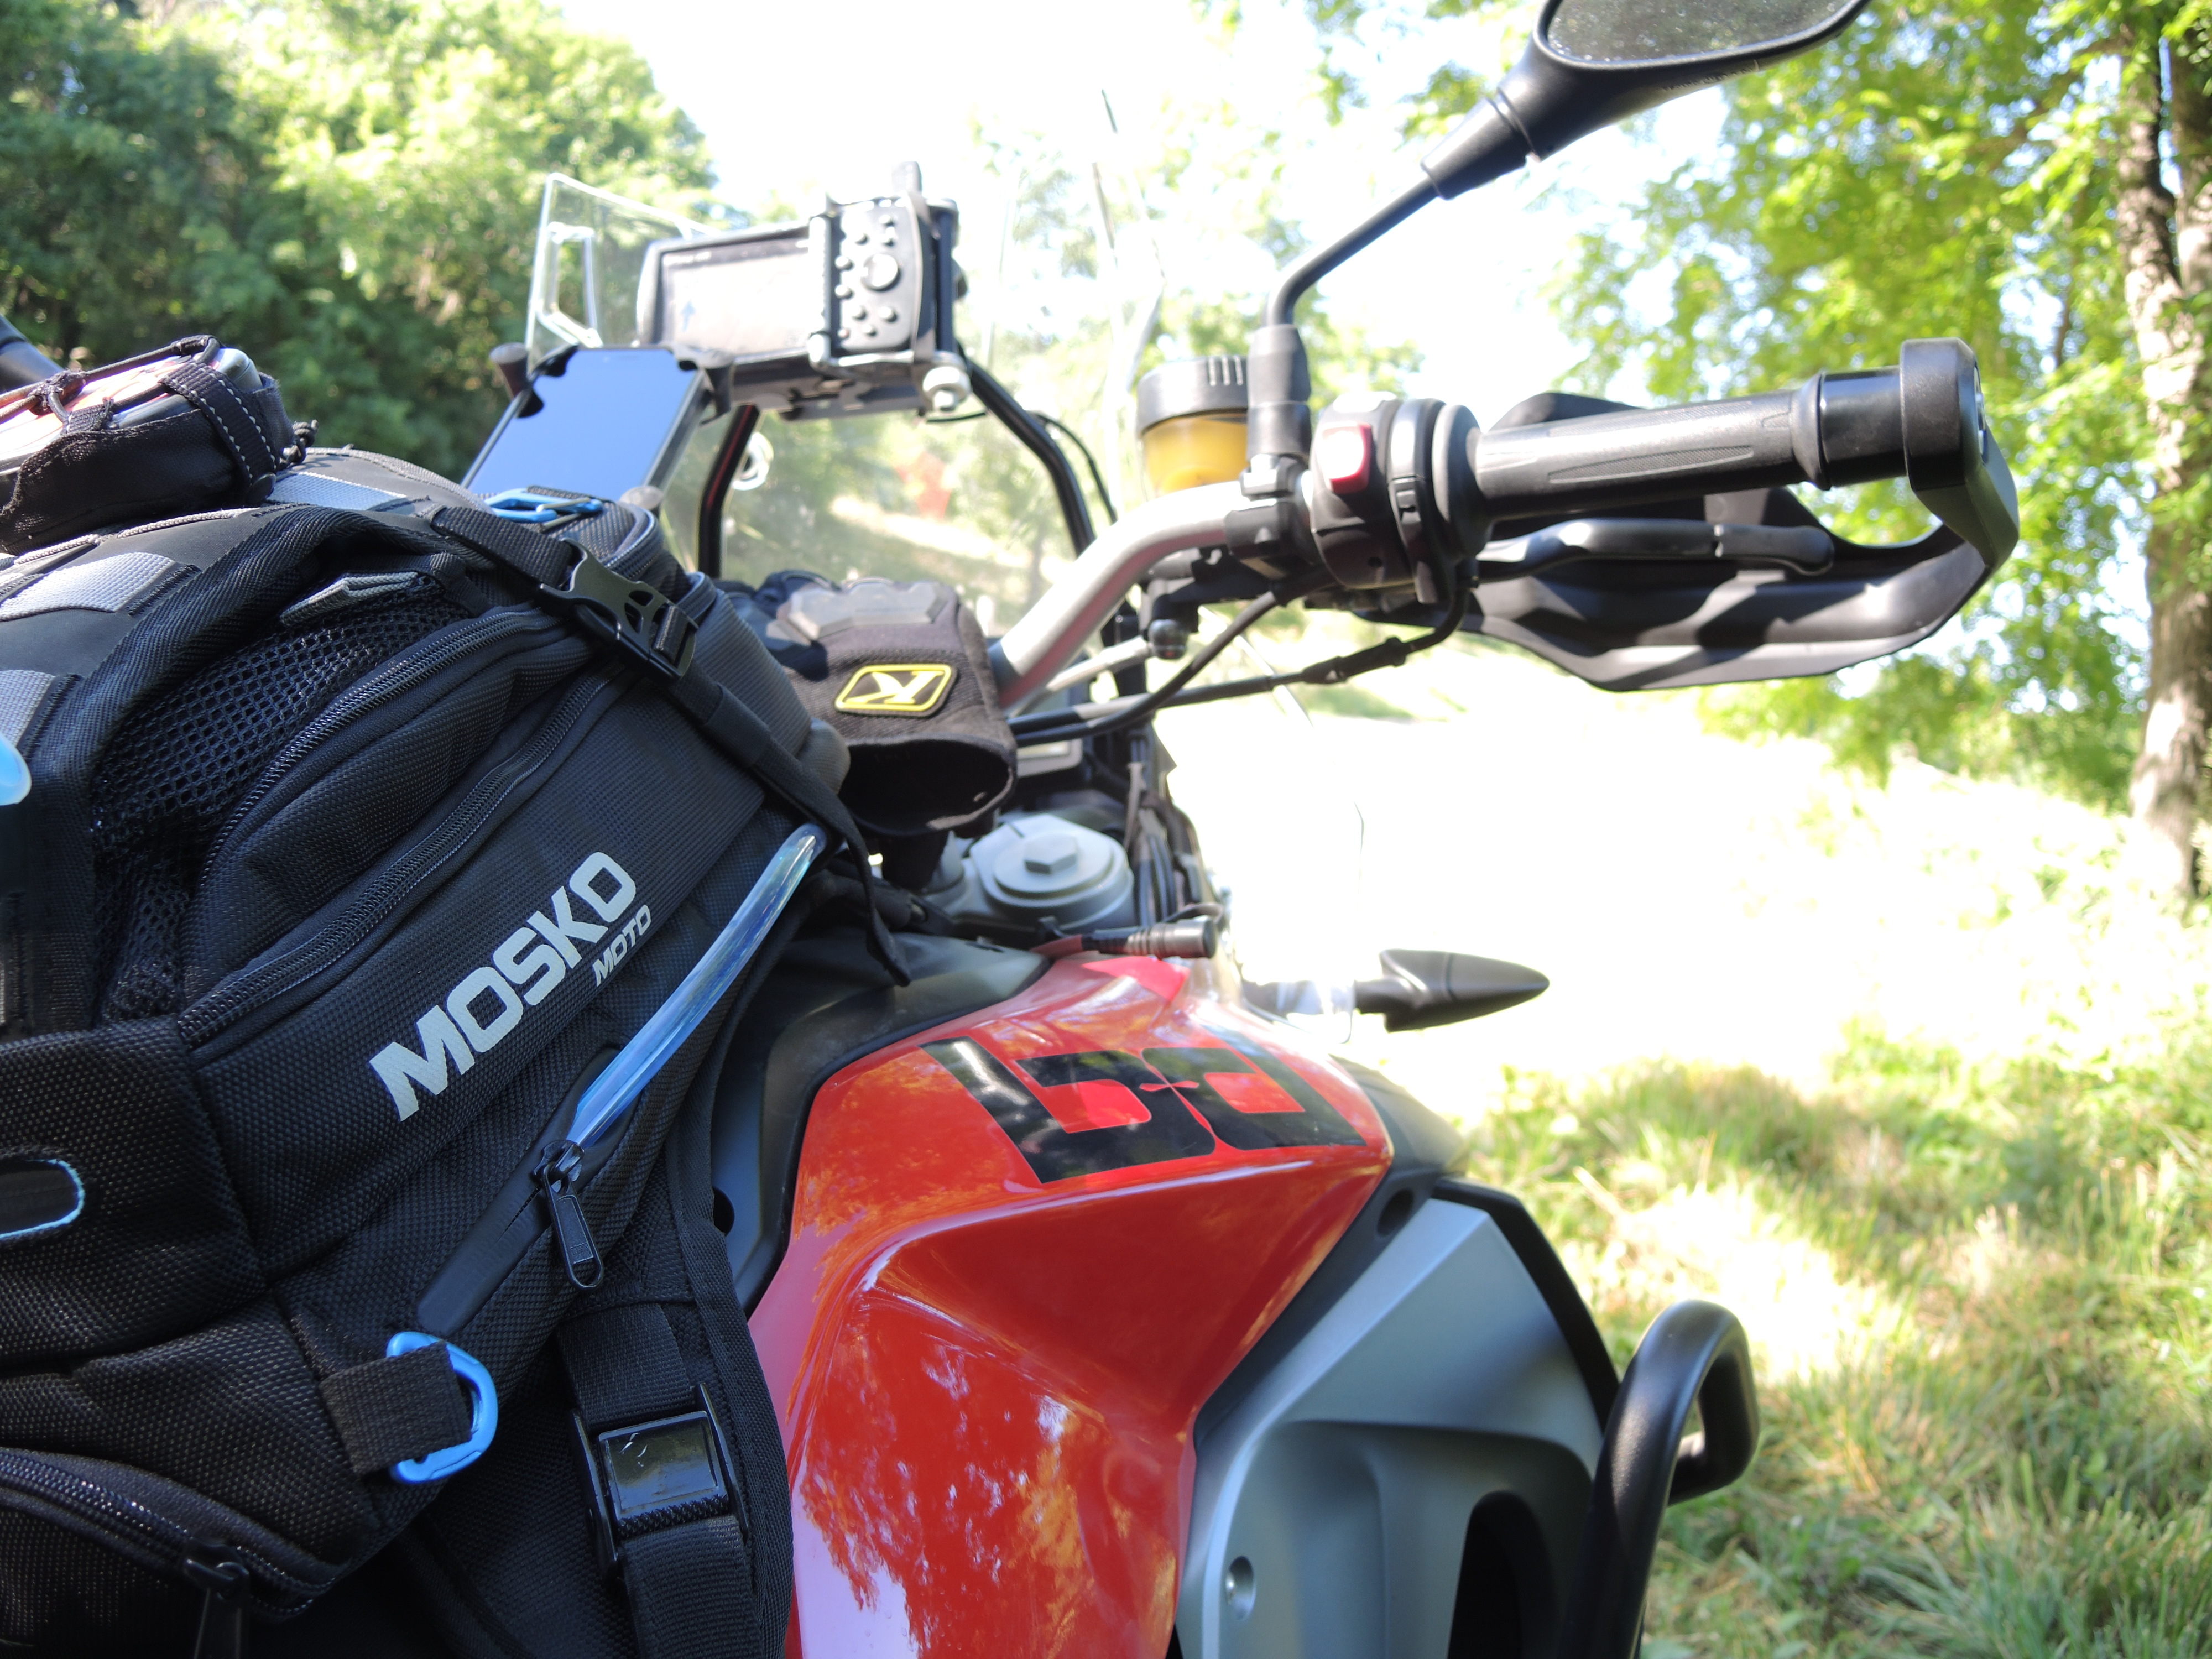 Backcountry Pannier (V2.1) - Product Overview | Mosko Moto - YouTube